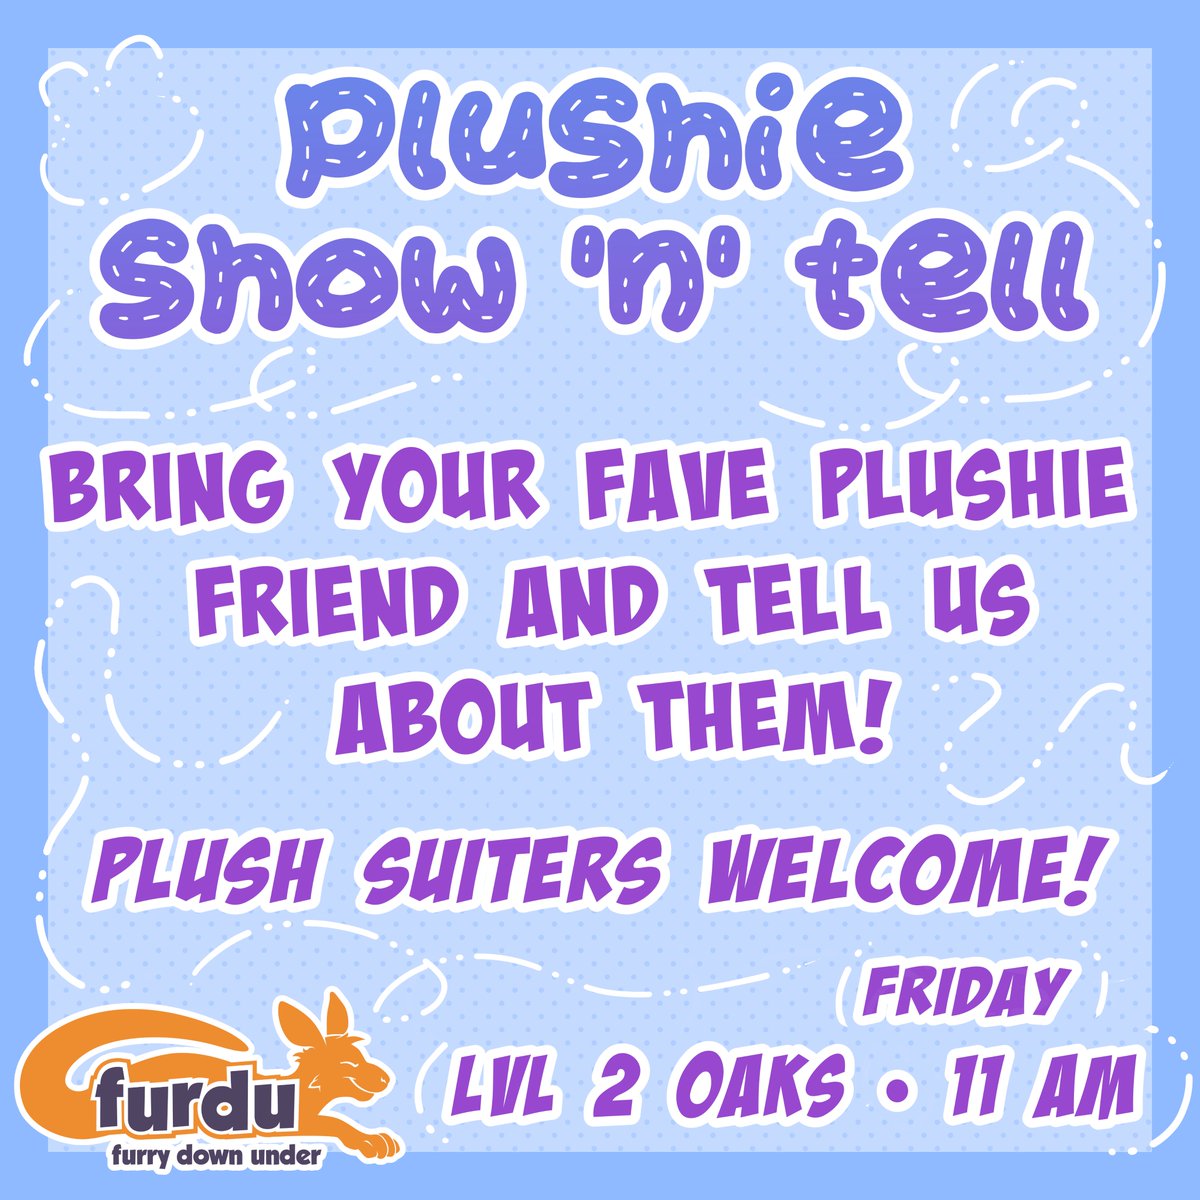 🚀🚀🚀🚀🚀 This @FurDUcon bring your little plushie friend along for some Circle Time! 🧸 We want to meet your plush, find out what they like, and why they’re your best friend. Bring unwanted plushies to swap or rehome. Plushsuiters welcome! 🚀🚀🚀🚀🚀